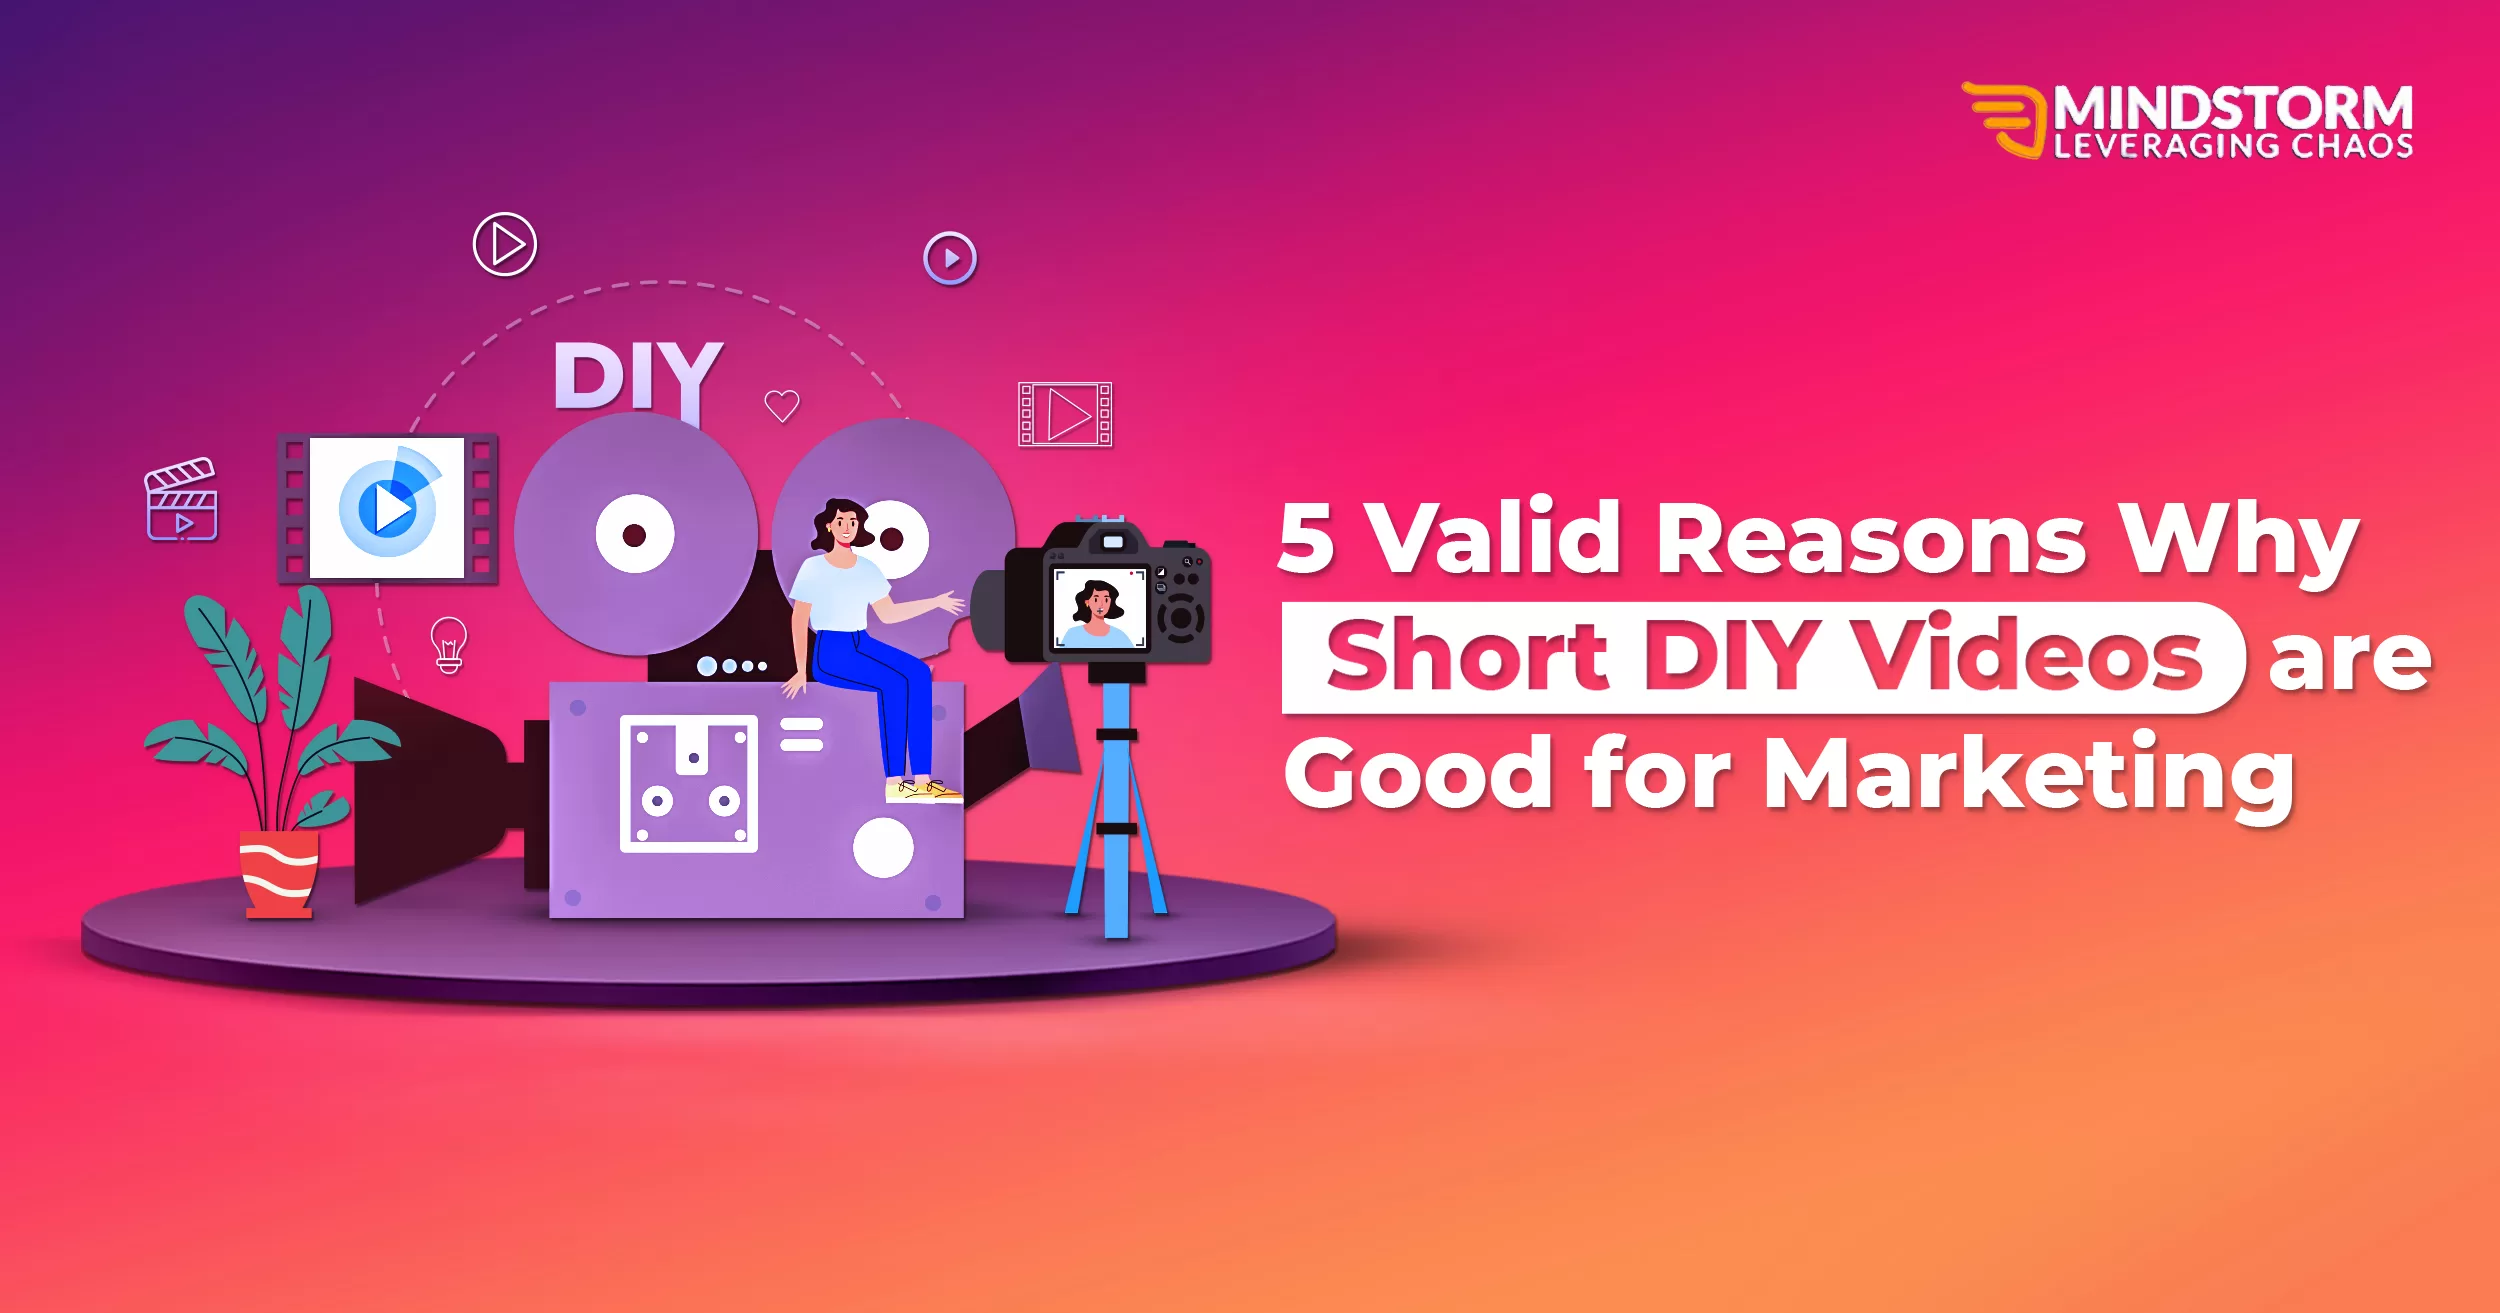 5 Valid Reasons Why Short DIY Videos are Good for Marketing